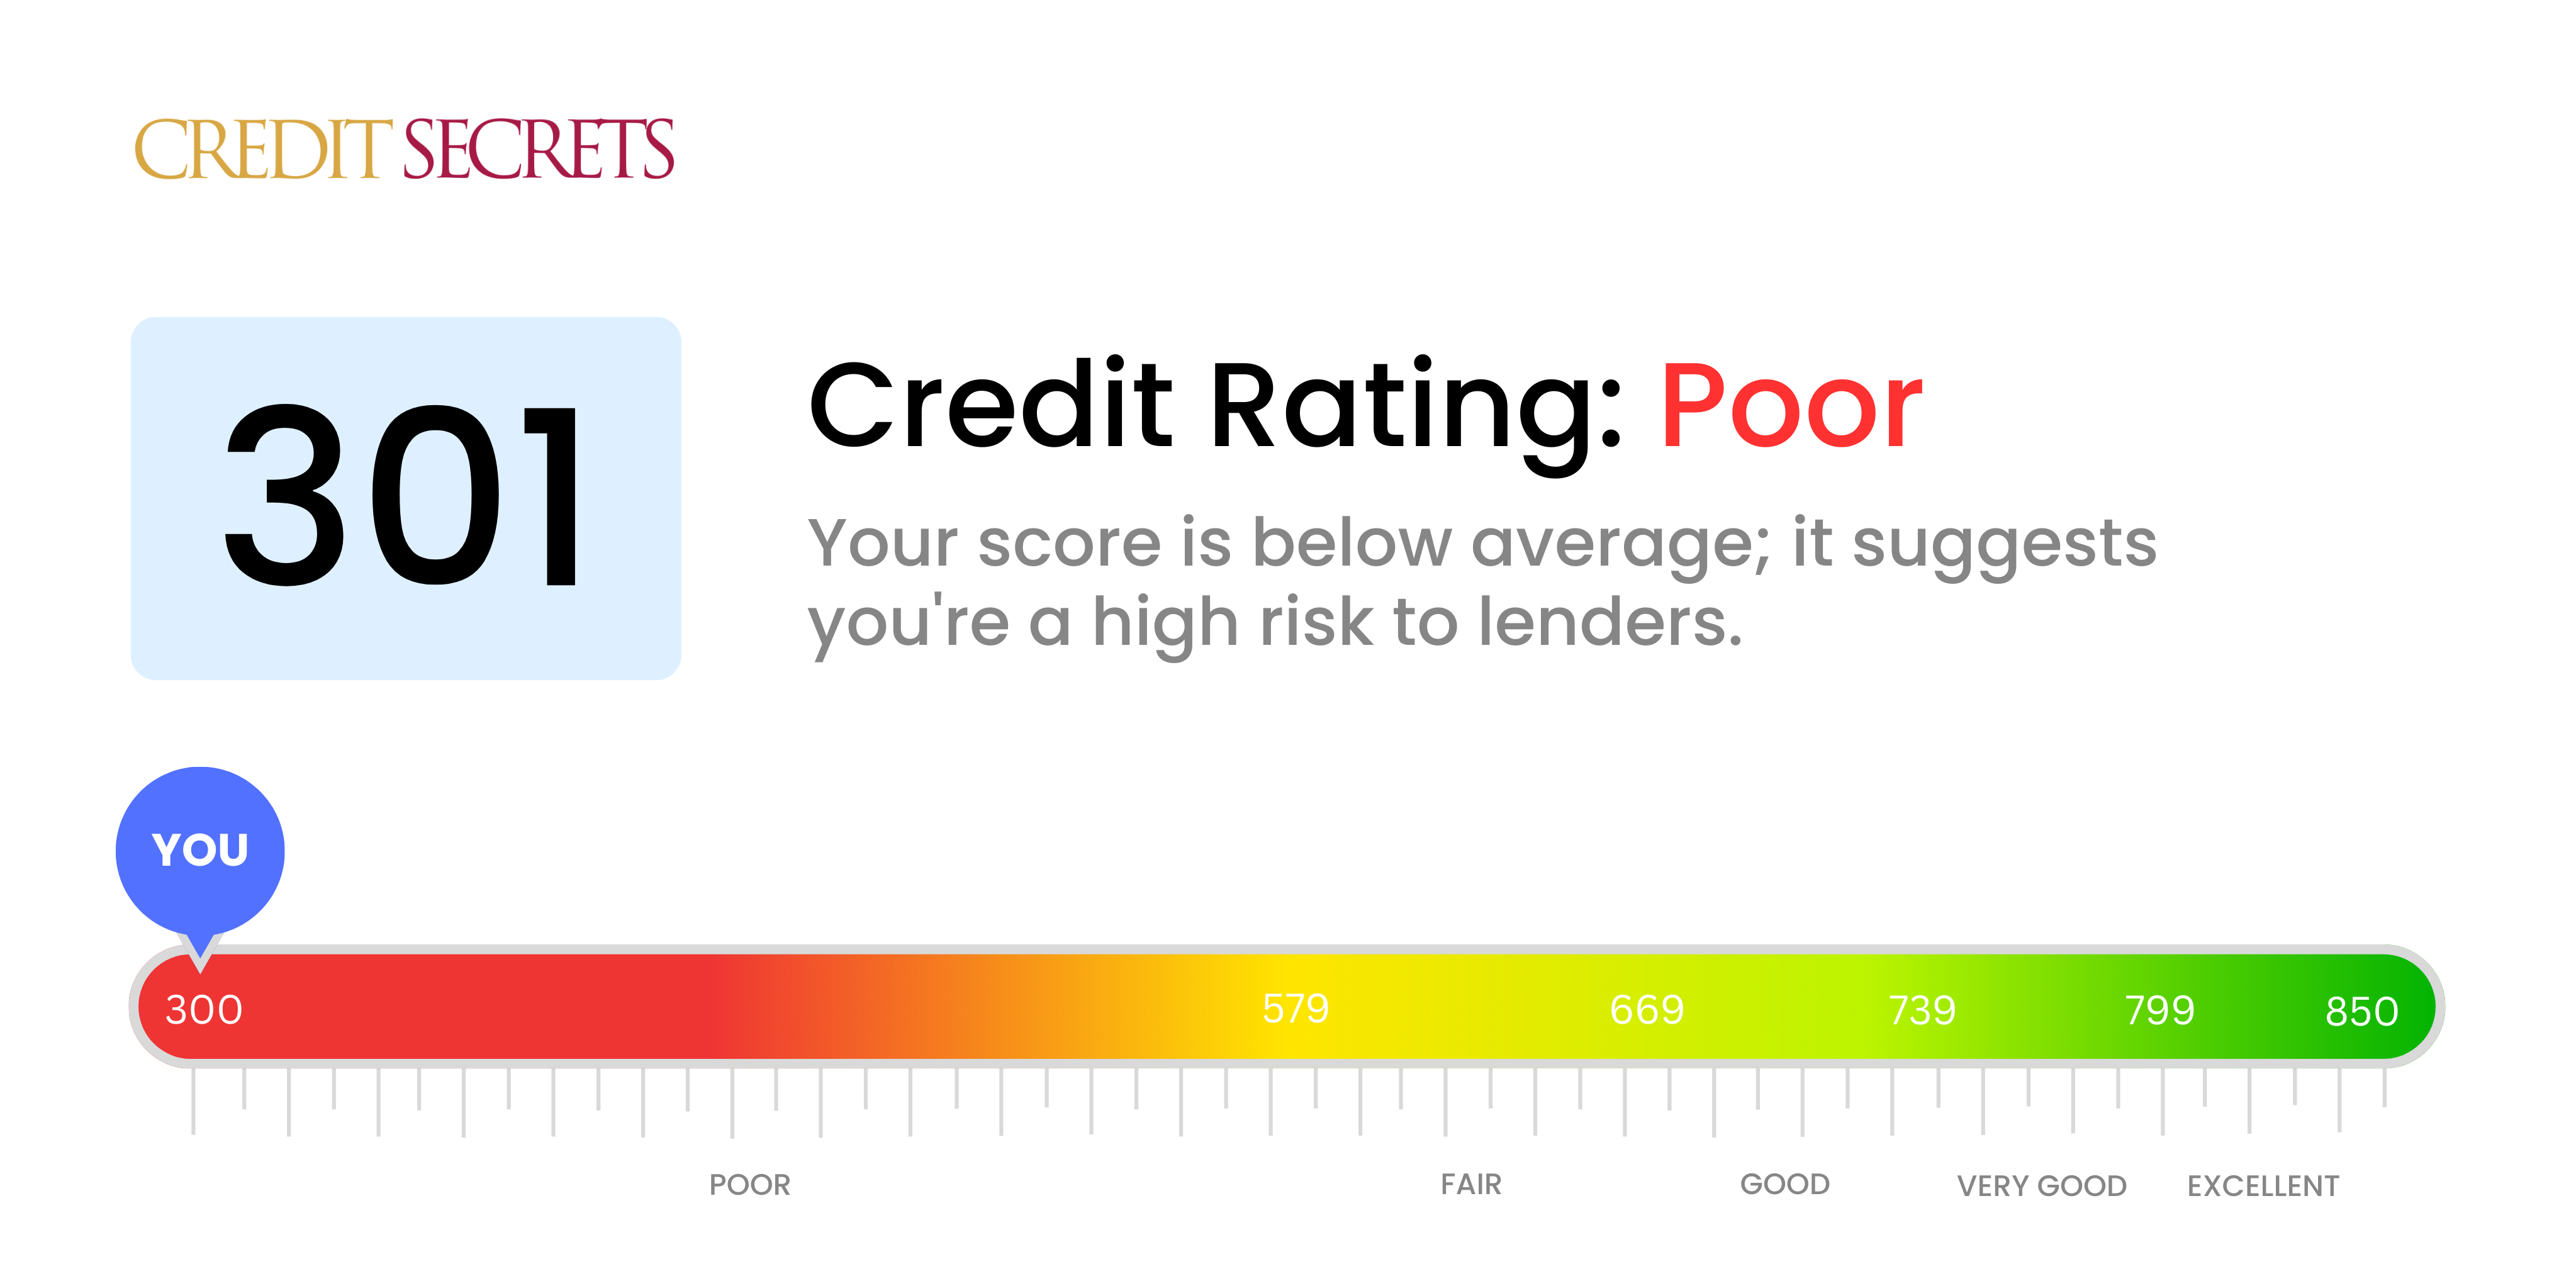 Is 301 a good credit score?